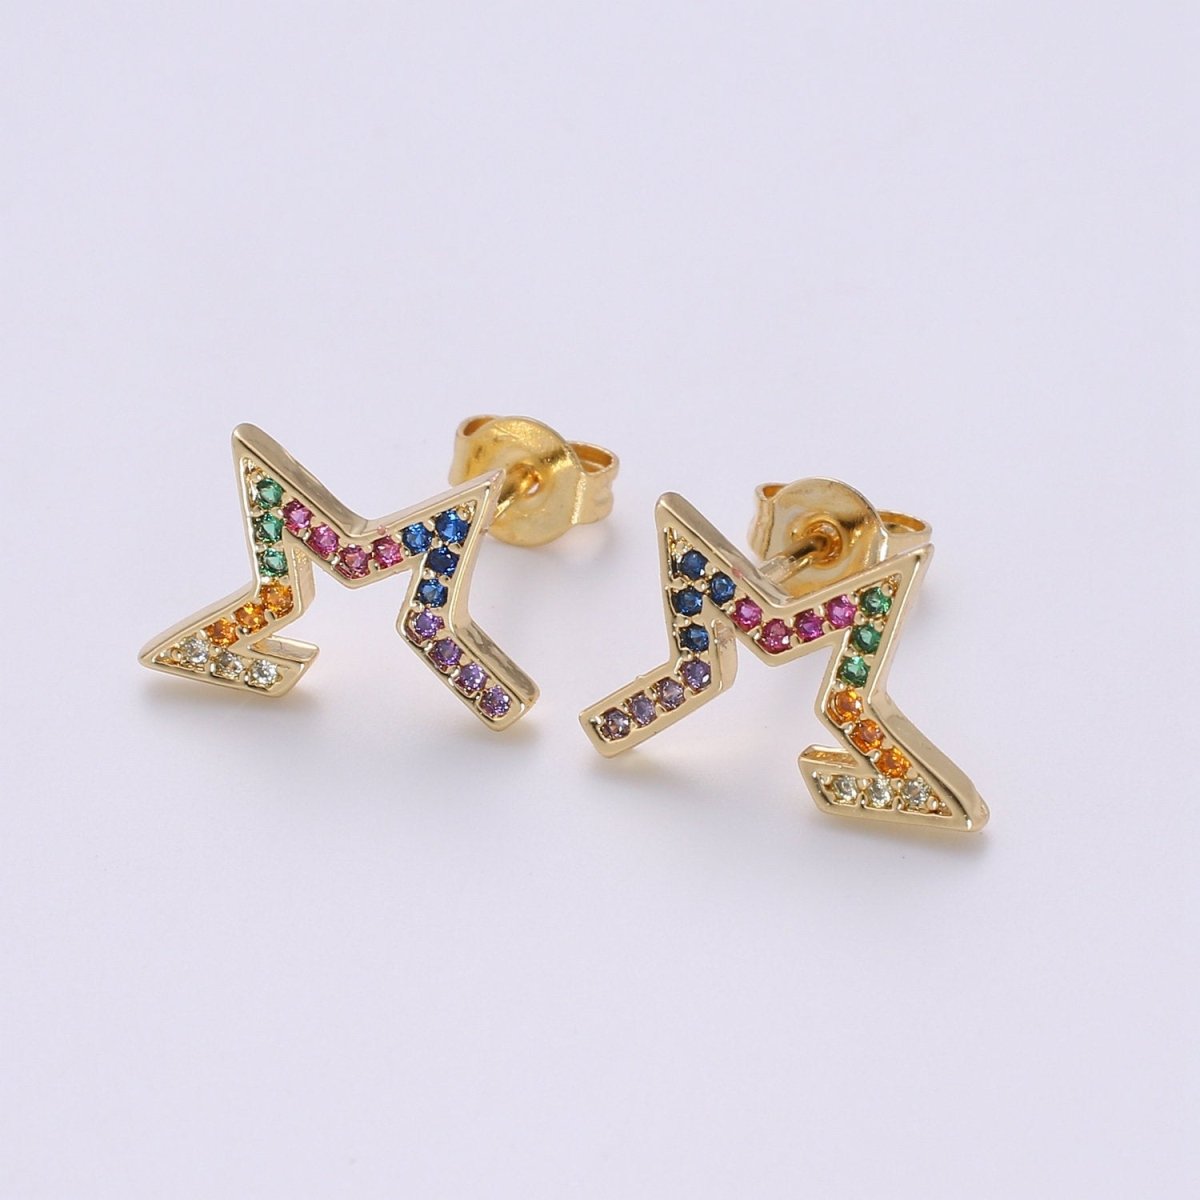 Tiny CZ Star Stud Earrings Dainty Multi Color Cloud Stud Earring Gold Minimalist Jewelry for her christmas gift Q-310 - DLUXCA